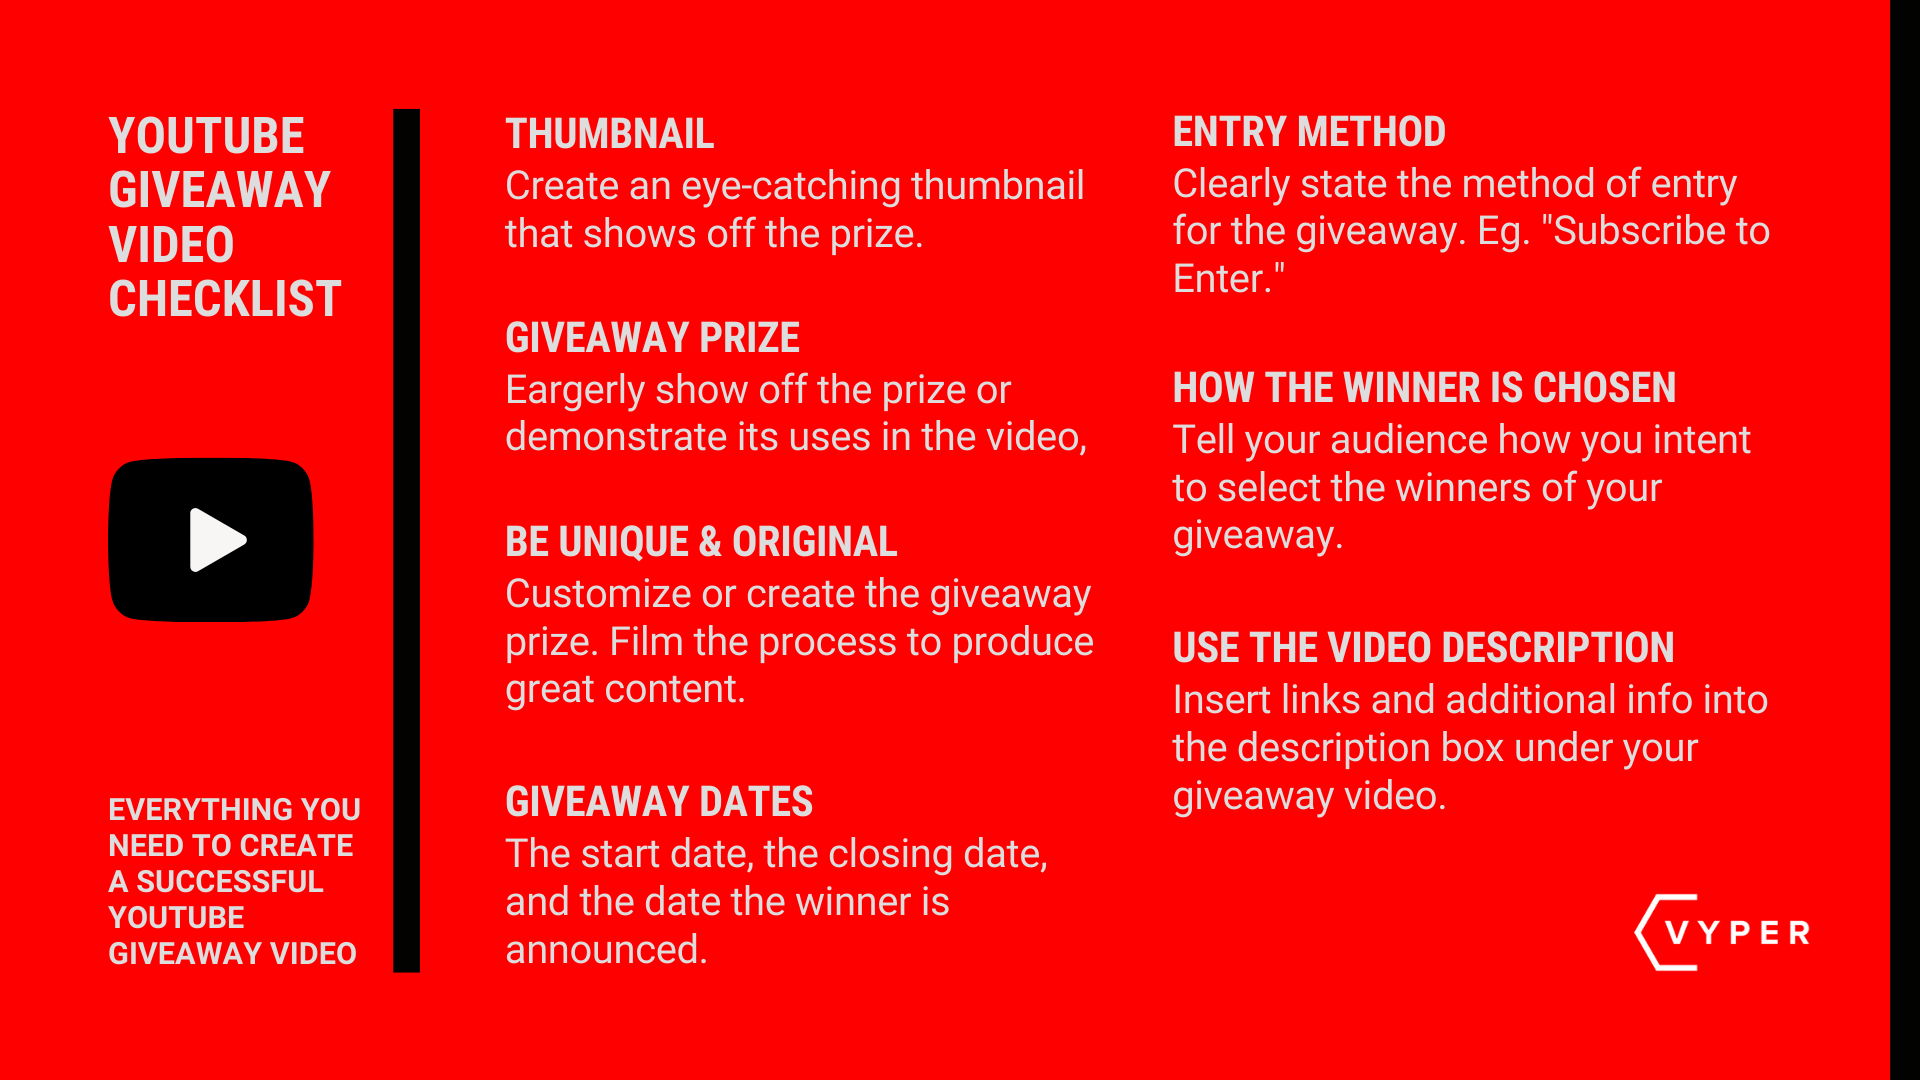 YouTube Giveaway Checklist